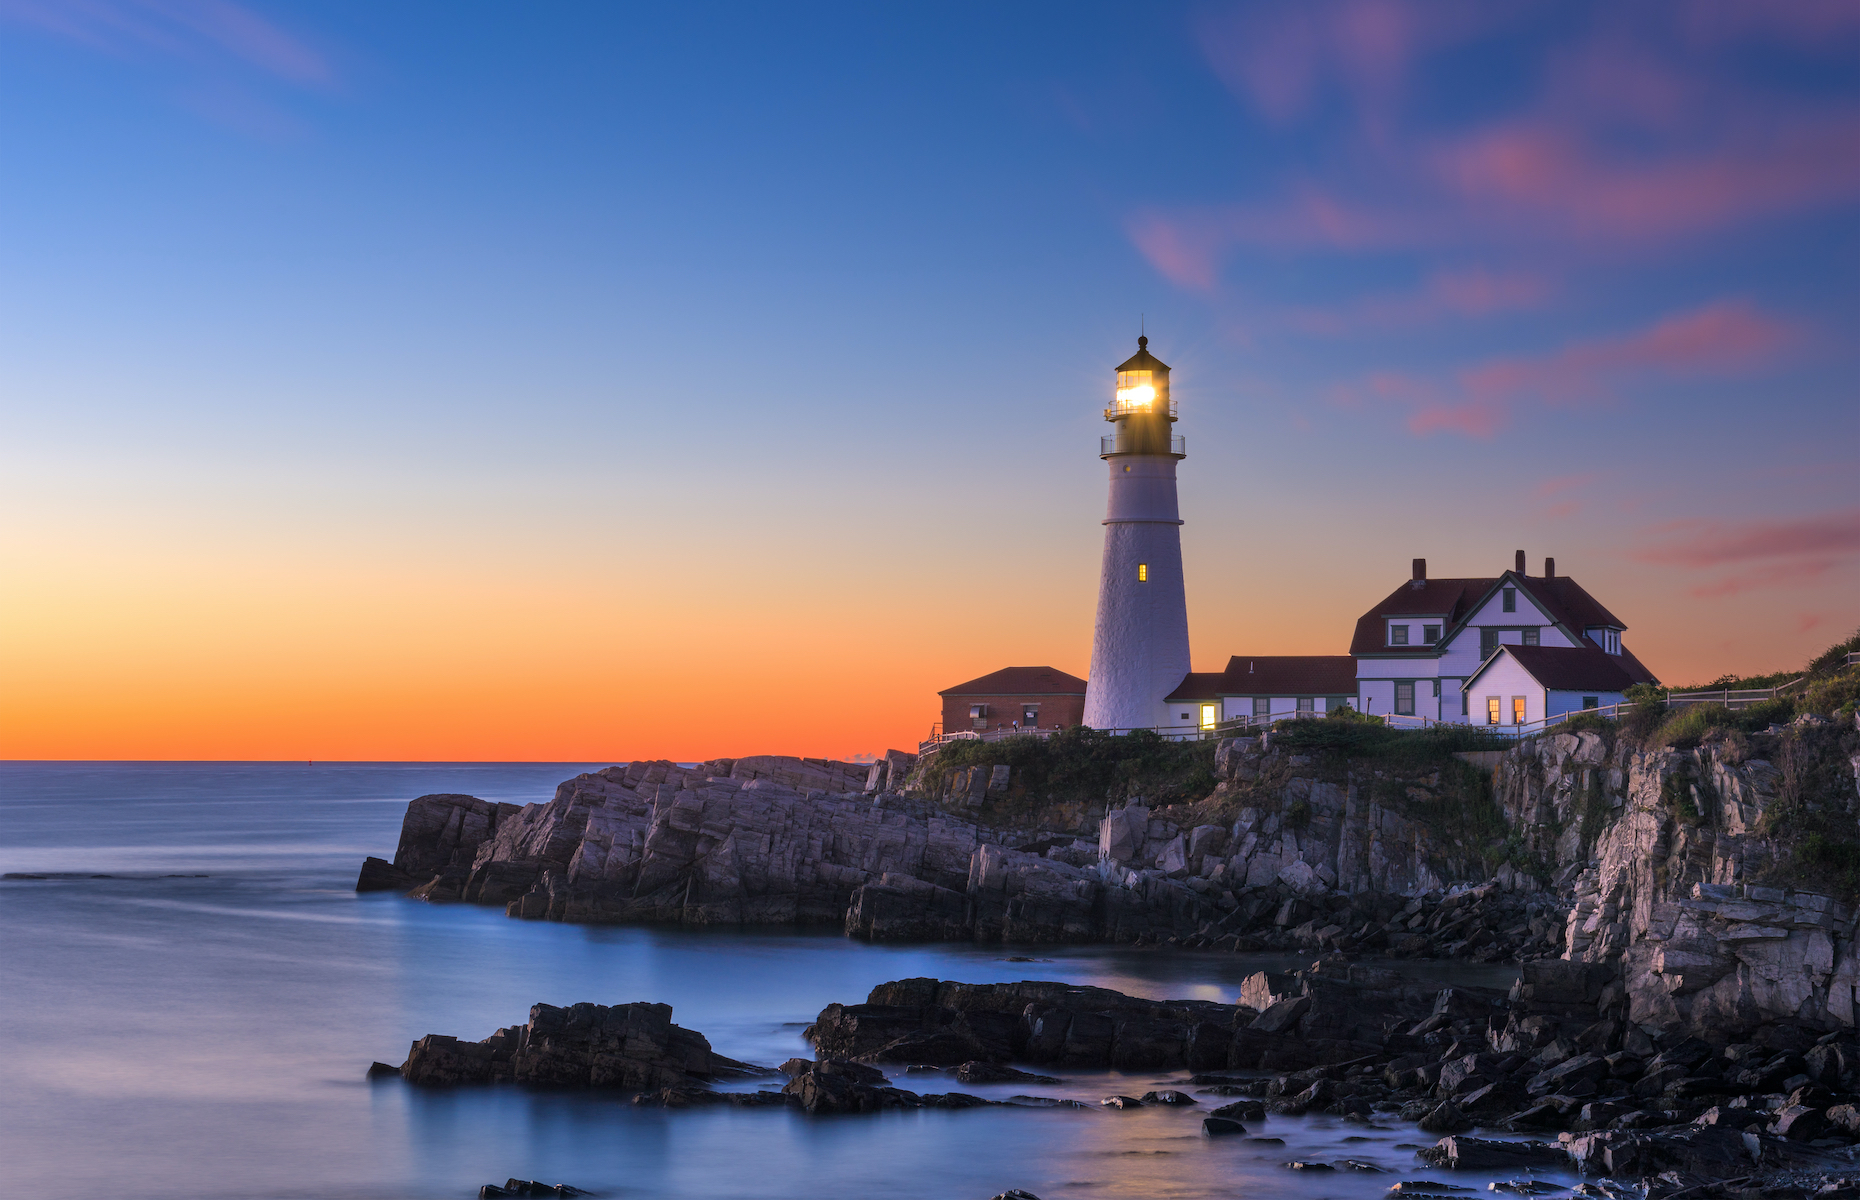 <p class="p1"><span>Cape Elizabeth’s emblematic <a href="https://visitmaine.com/places-to-go/greater-portland-and-casco-bay/cape-elizabeth" rel="noreferrer noopener"><span>1791</span></a> lighthouse stands tall in <a href="https://portlandheadlight.com/what-to-do/the-lighthouse" rel="noreferrer noopener"><span>Fort Williams Park</span></a>, offering visitors the opportunity to take countless photos of the rocky coastline. In fact, the entire landscape will take your breath away!</span></p>